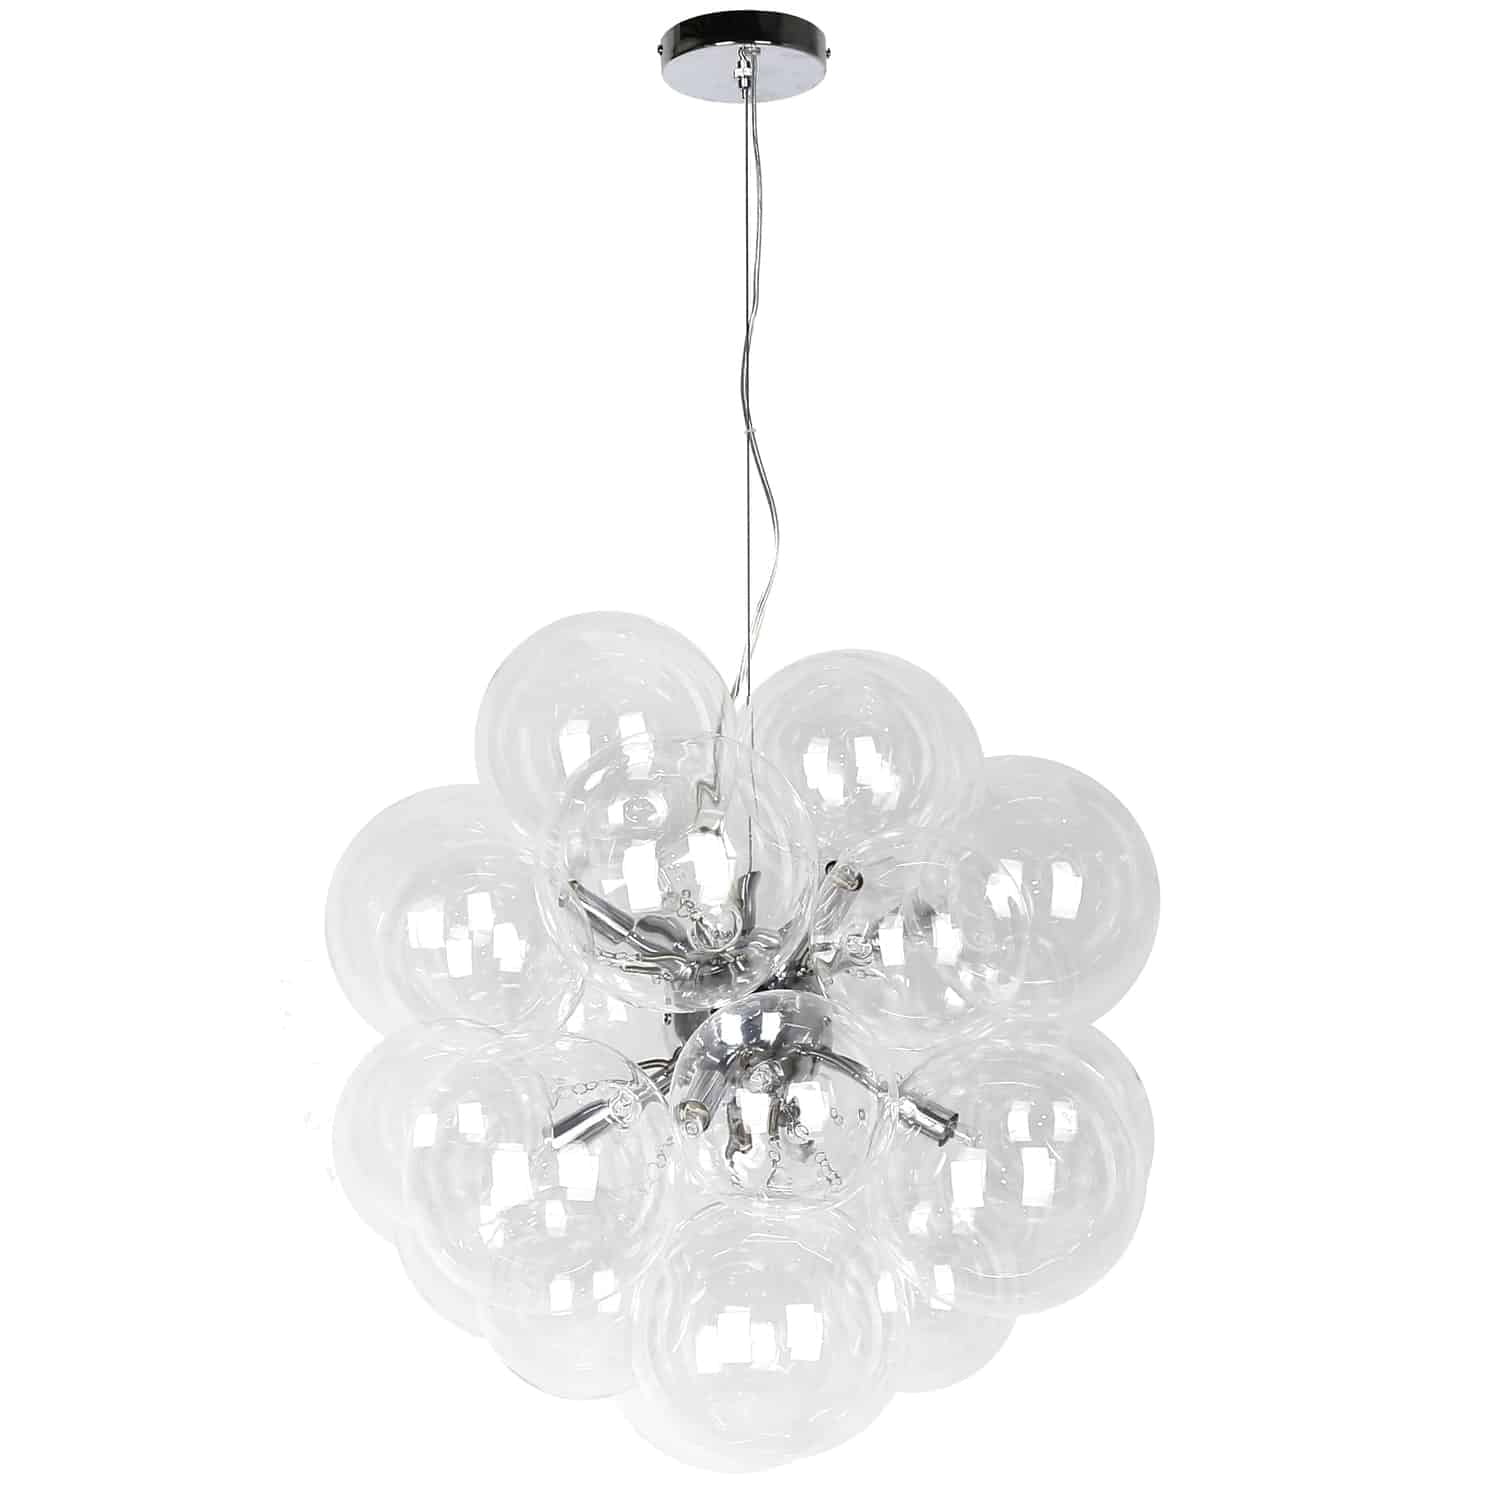 Comet 6 Light Halogen Pendant Ceiling Light with Clear Glass - Polished Chrome -  StarBrite, ST2938216